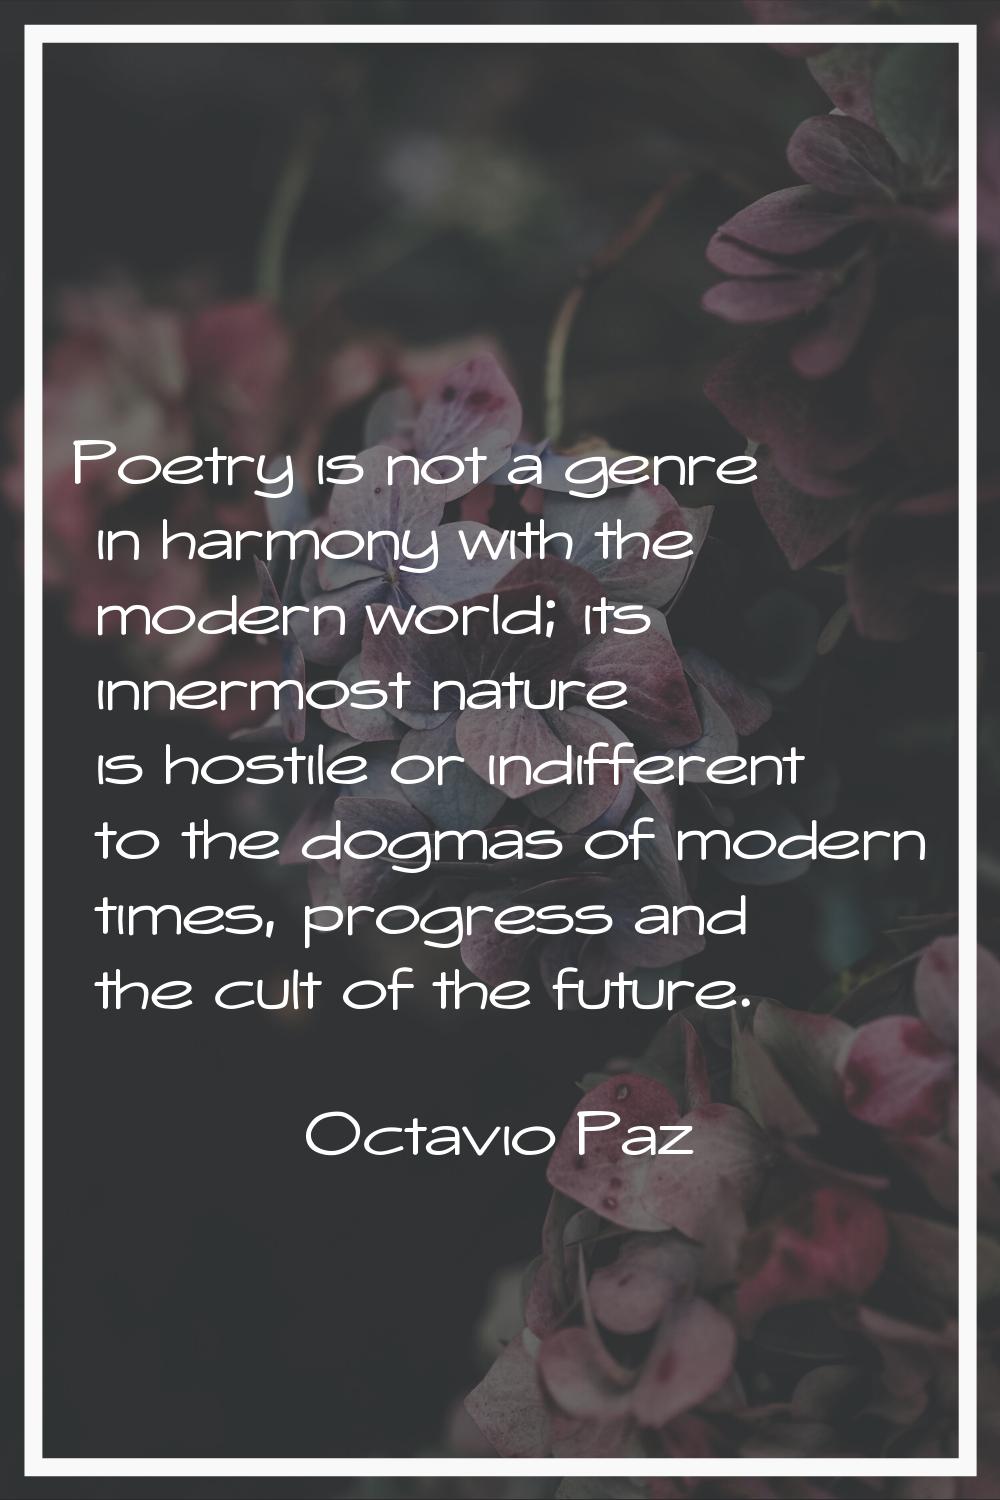 Poetry is not a genre in harmony with the modern world; its innermost nature is hostile or indiffer